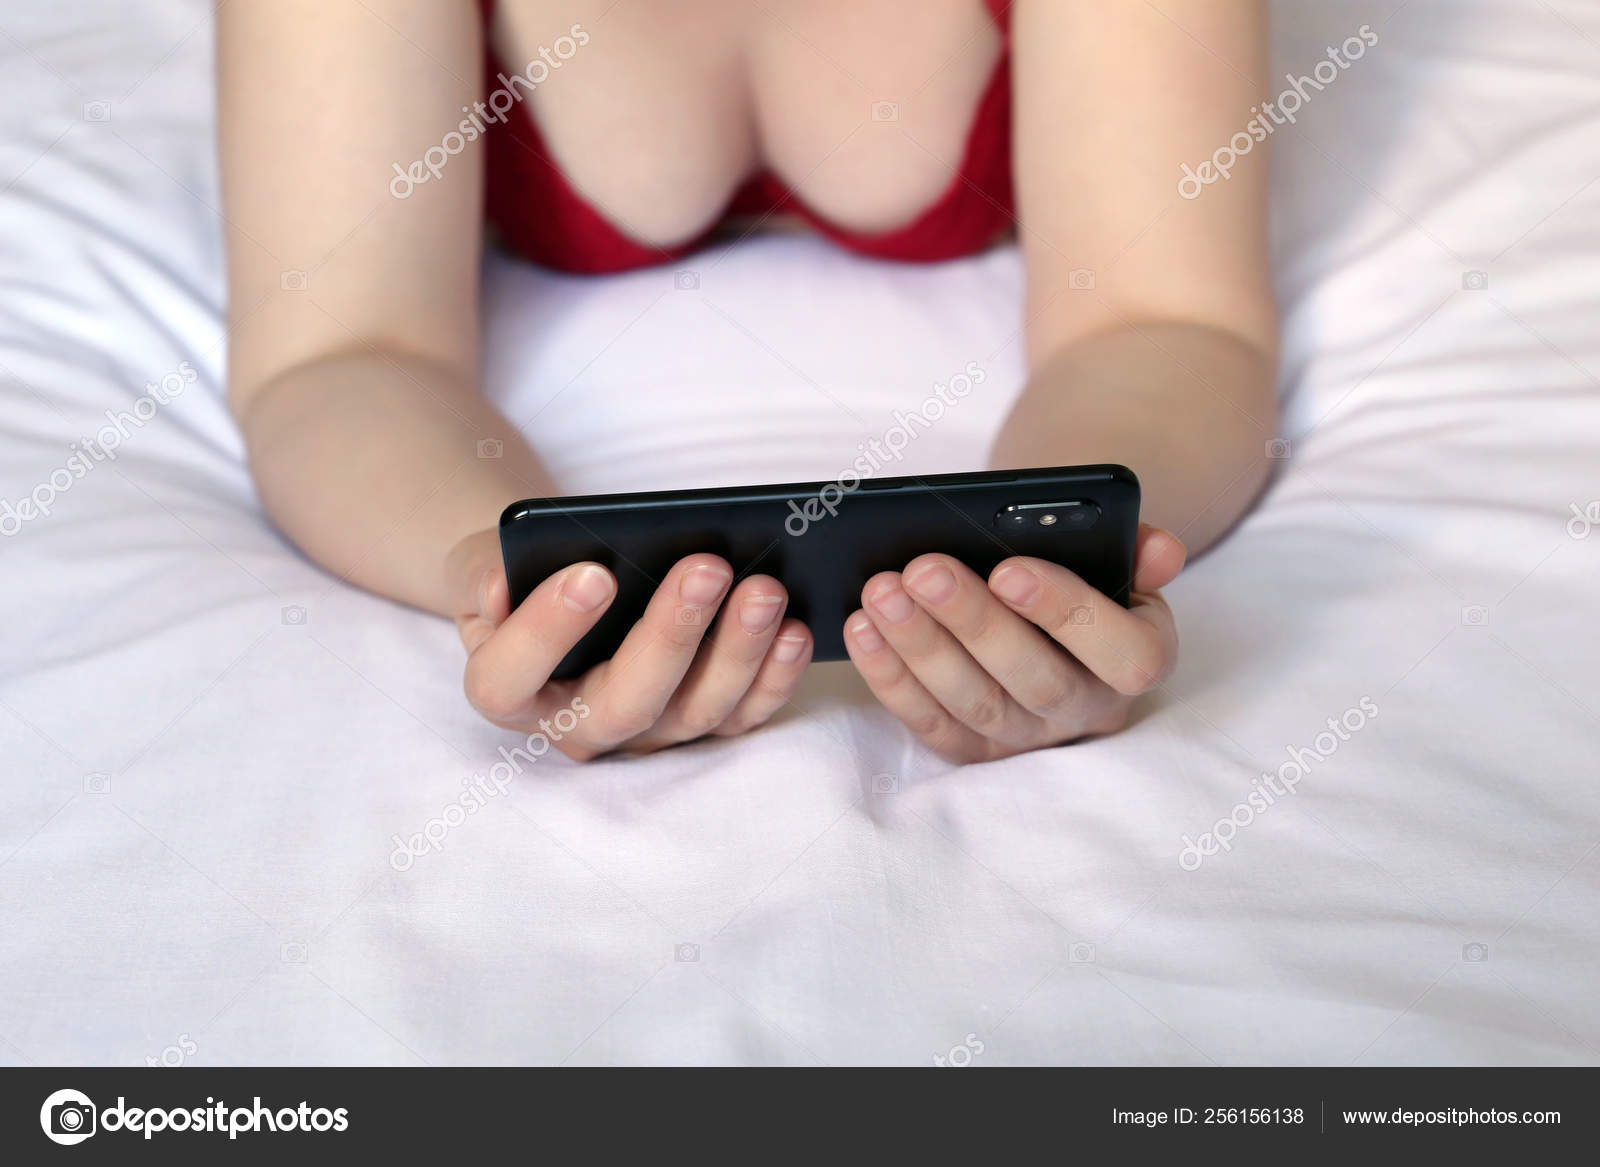 Sexy Women Watching Porn - Woman Watching Video Smartphone Mobile Phone Female Hands Close Sexy Stock  Photo by Â©olegpmr 256156138